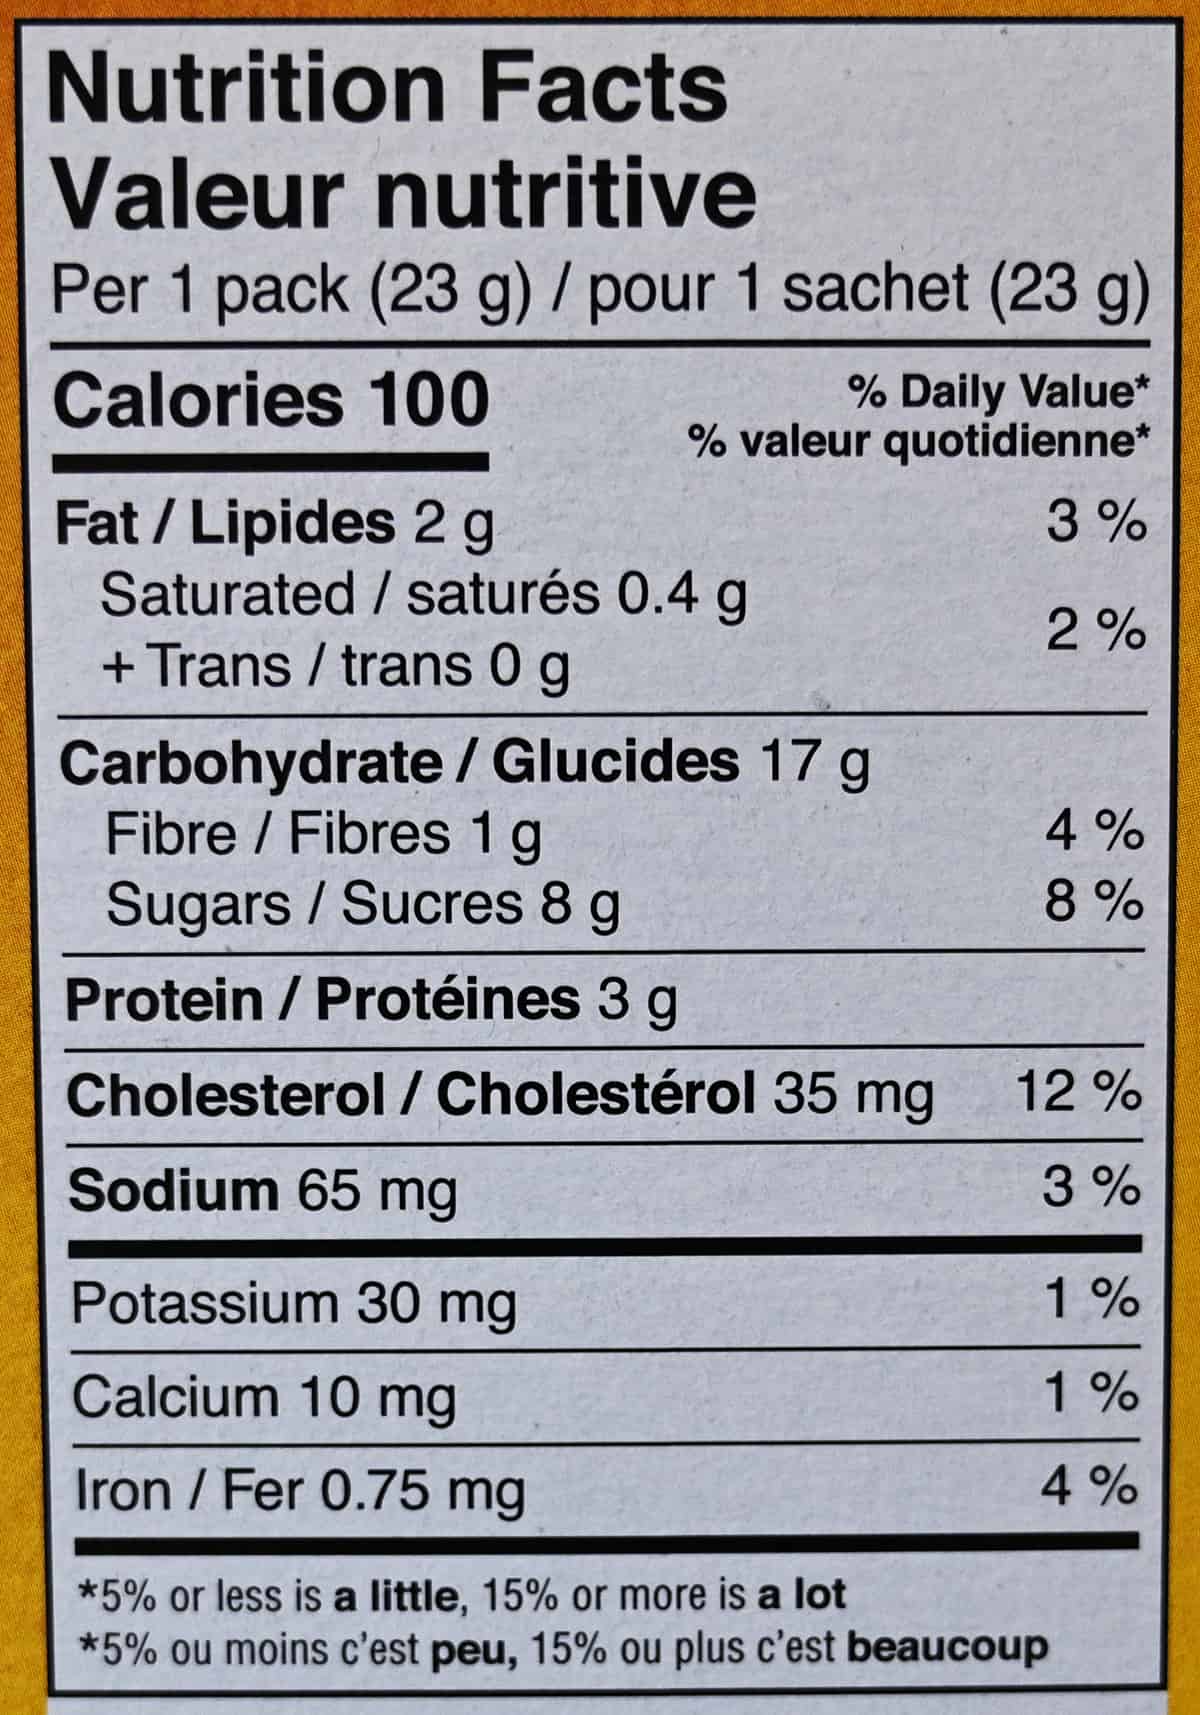 Image of the Thinaddictvies nutrition facts from the box.